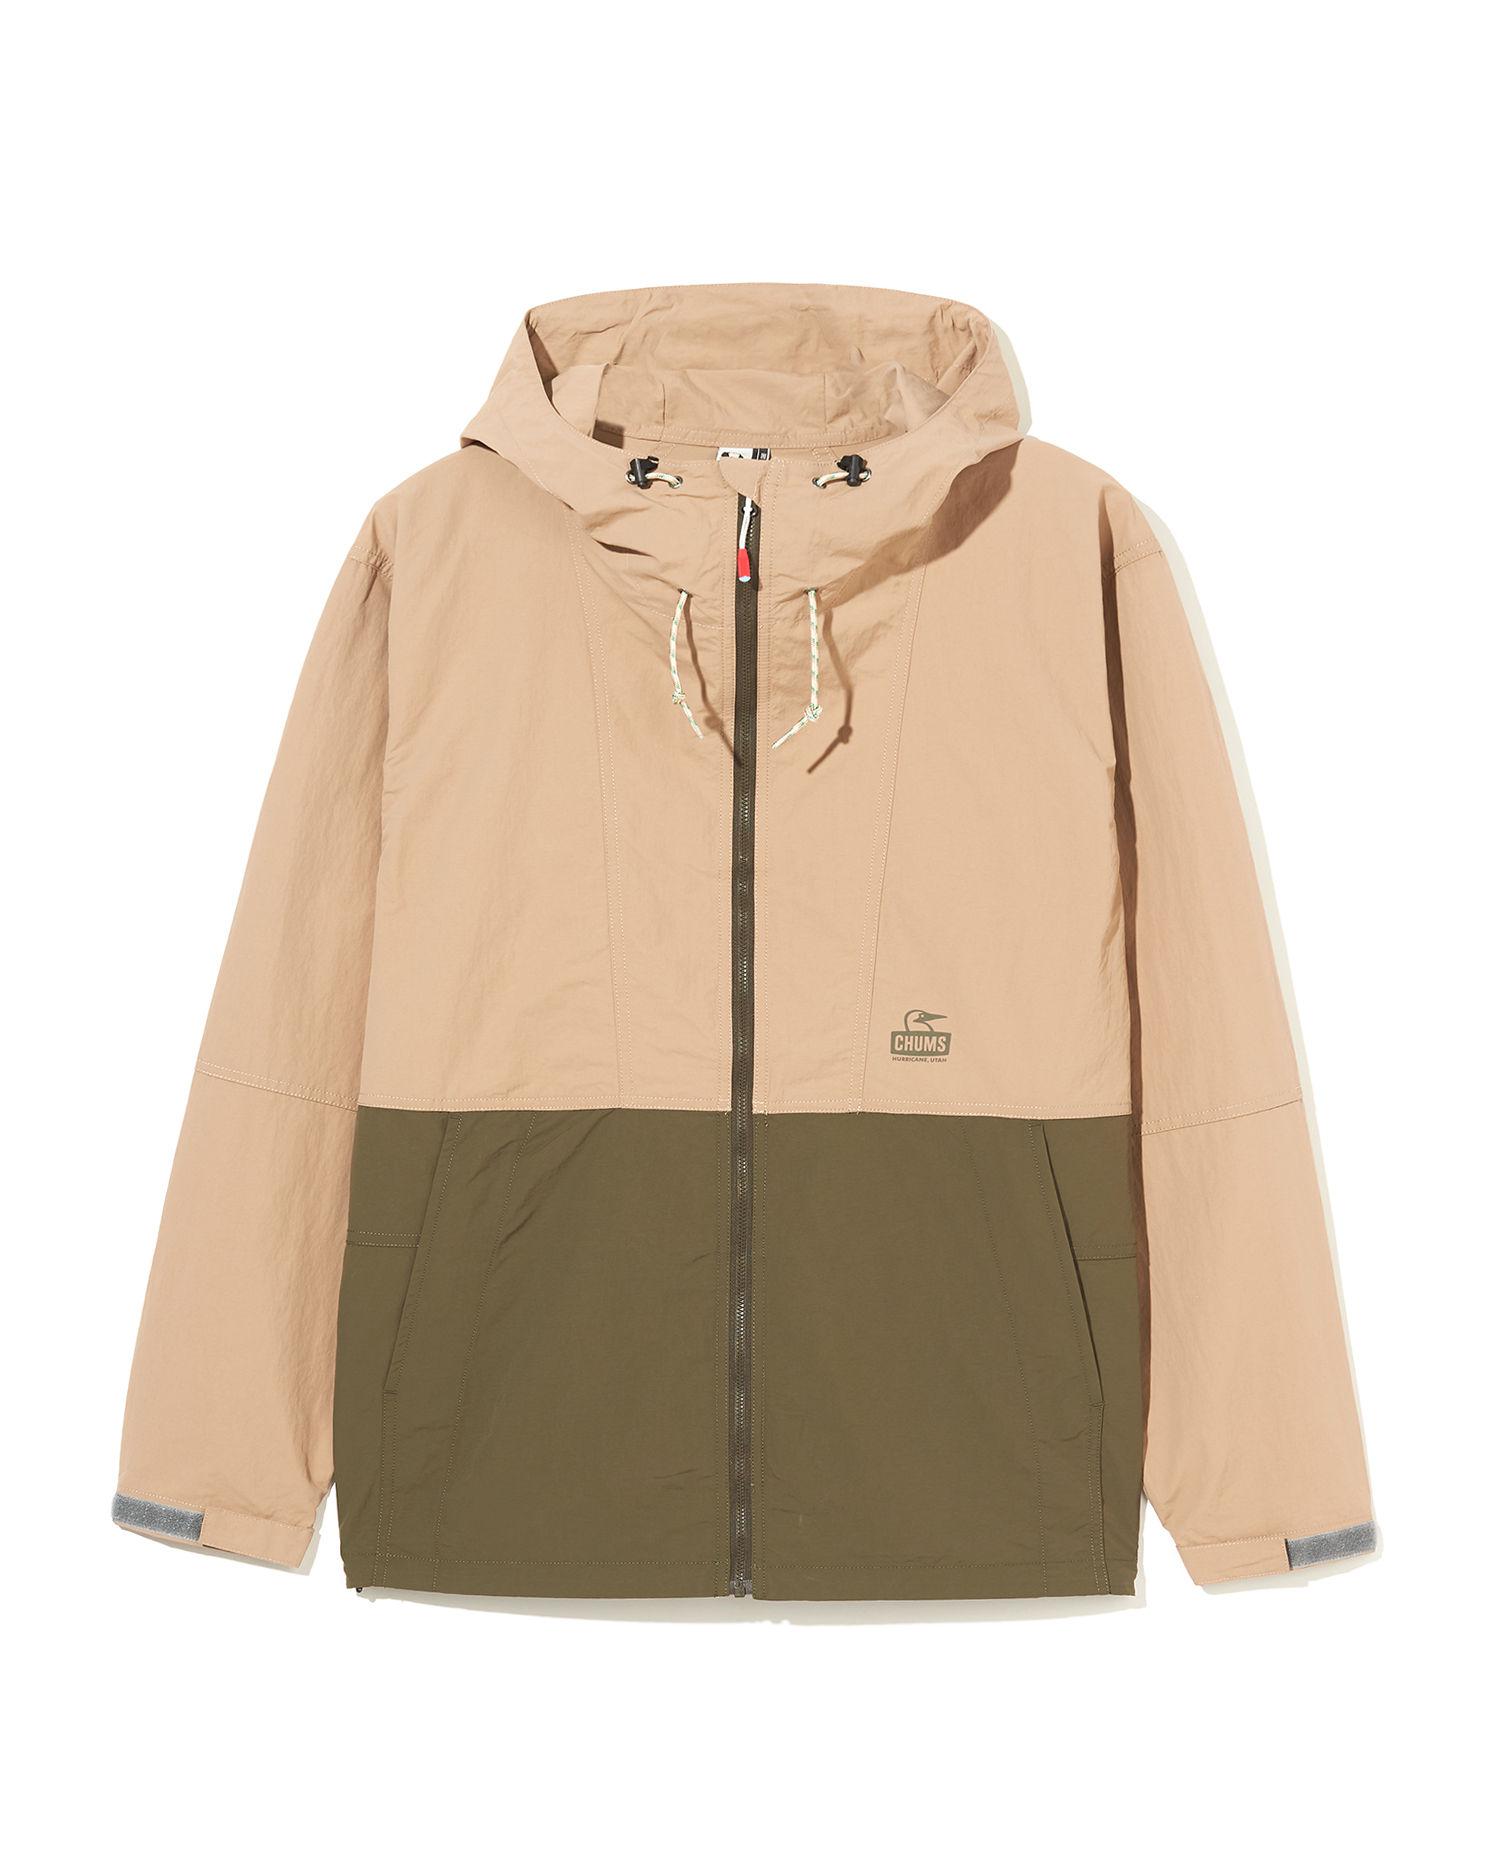 Zip-up panelled jacket by CHUMS